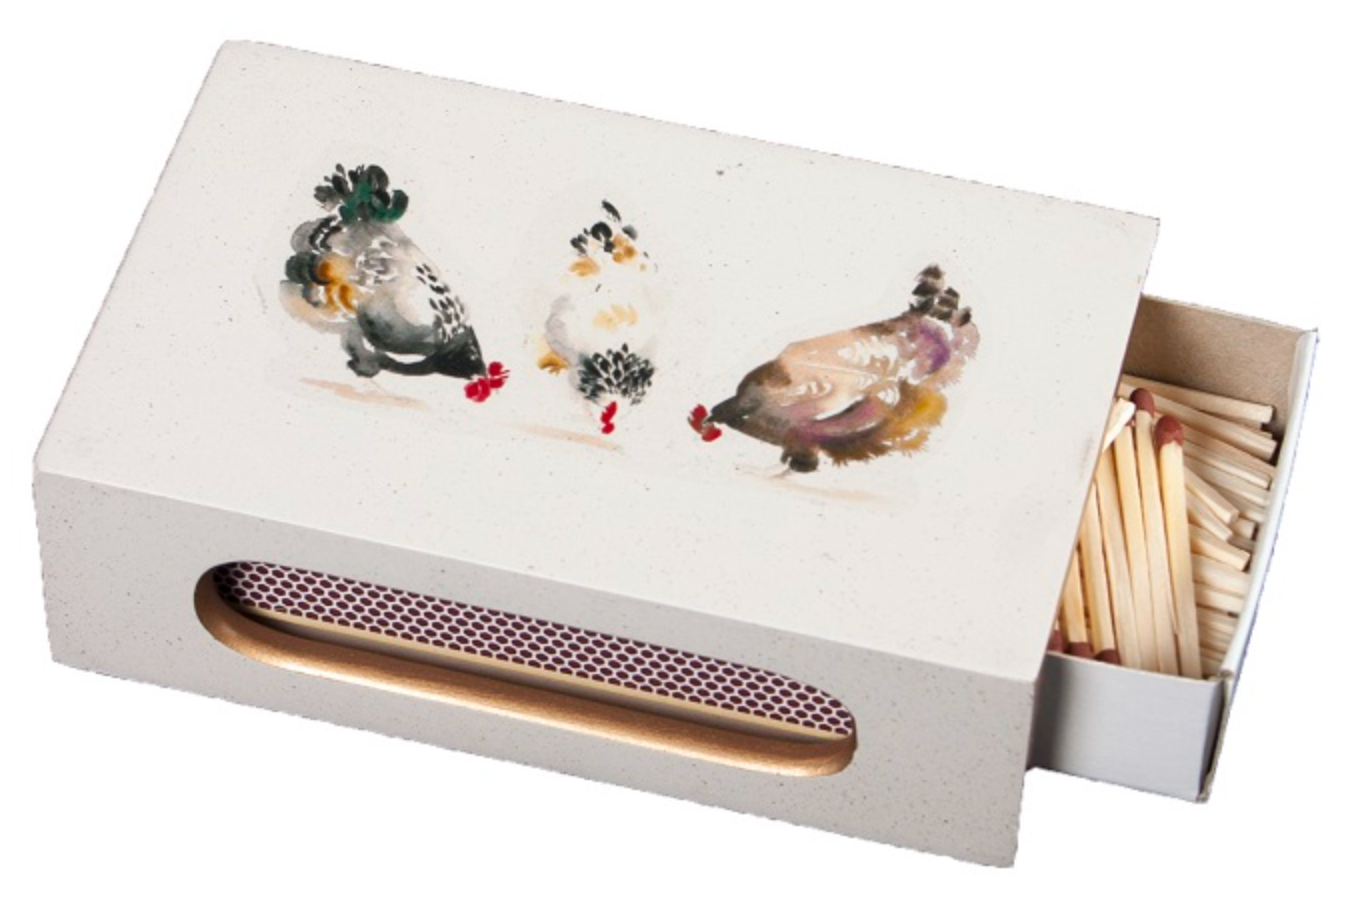 Standard Wooden Matchbox Cover with Matches: Chickens